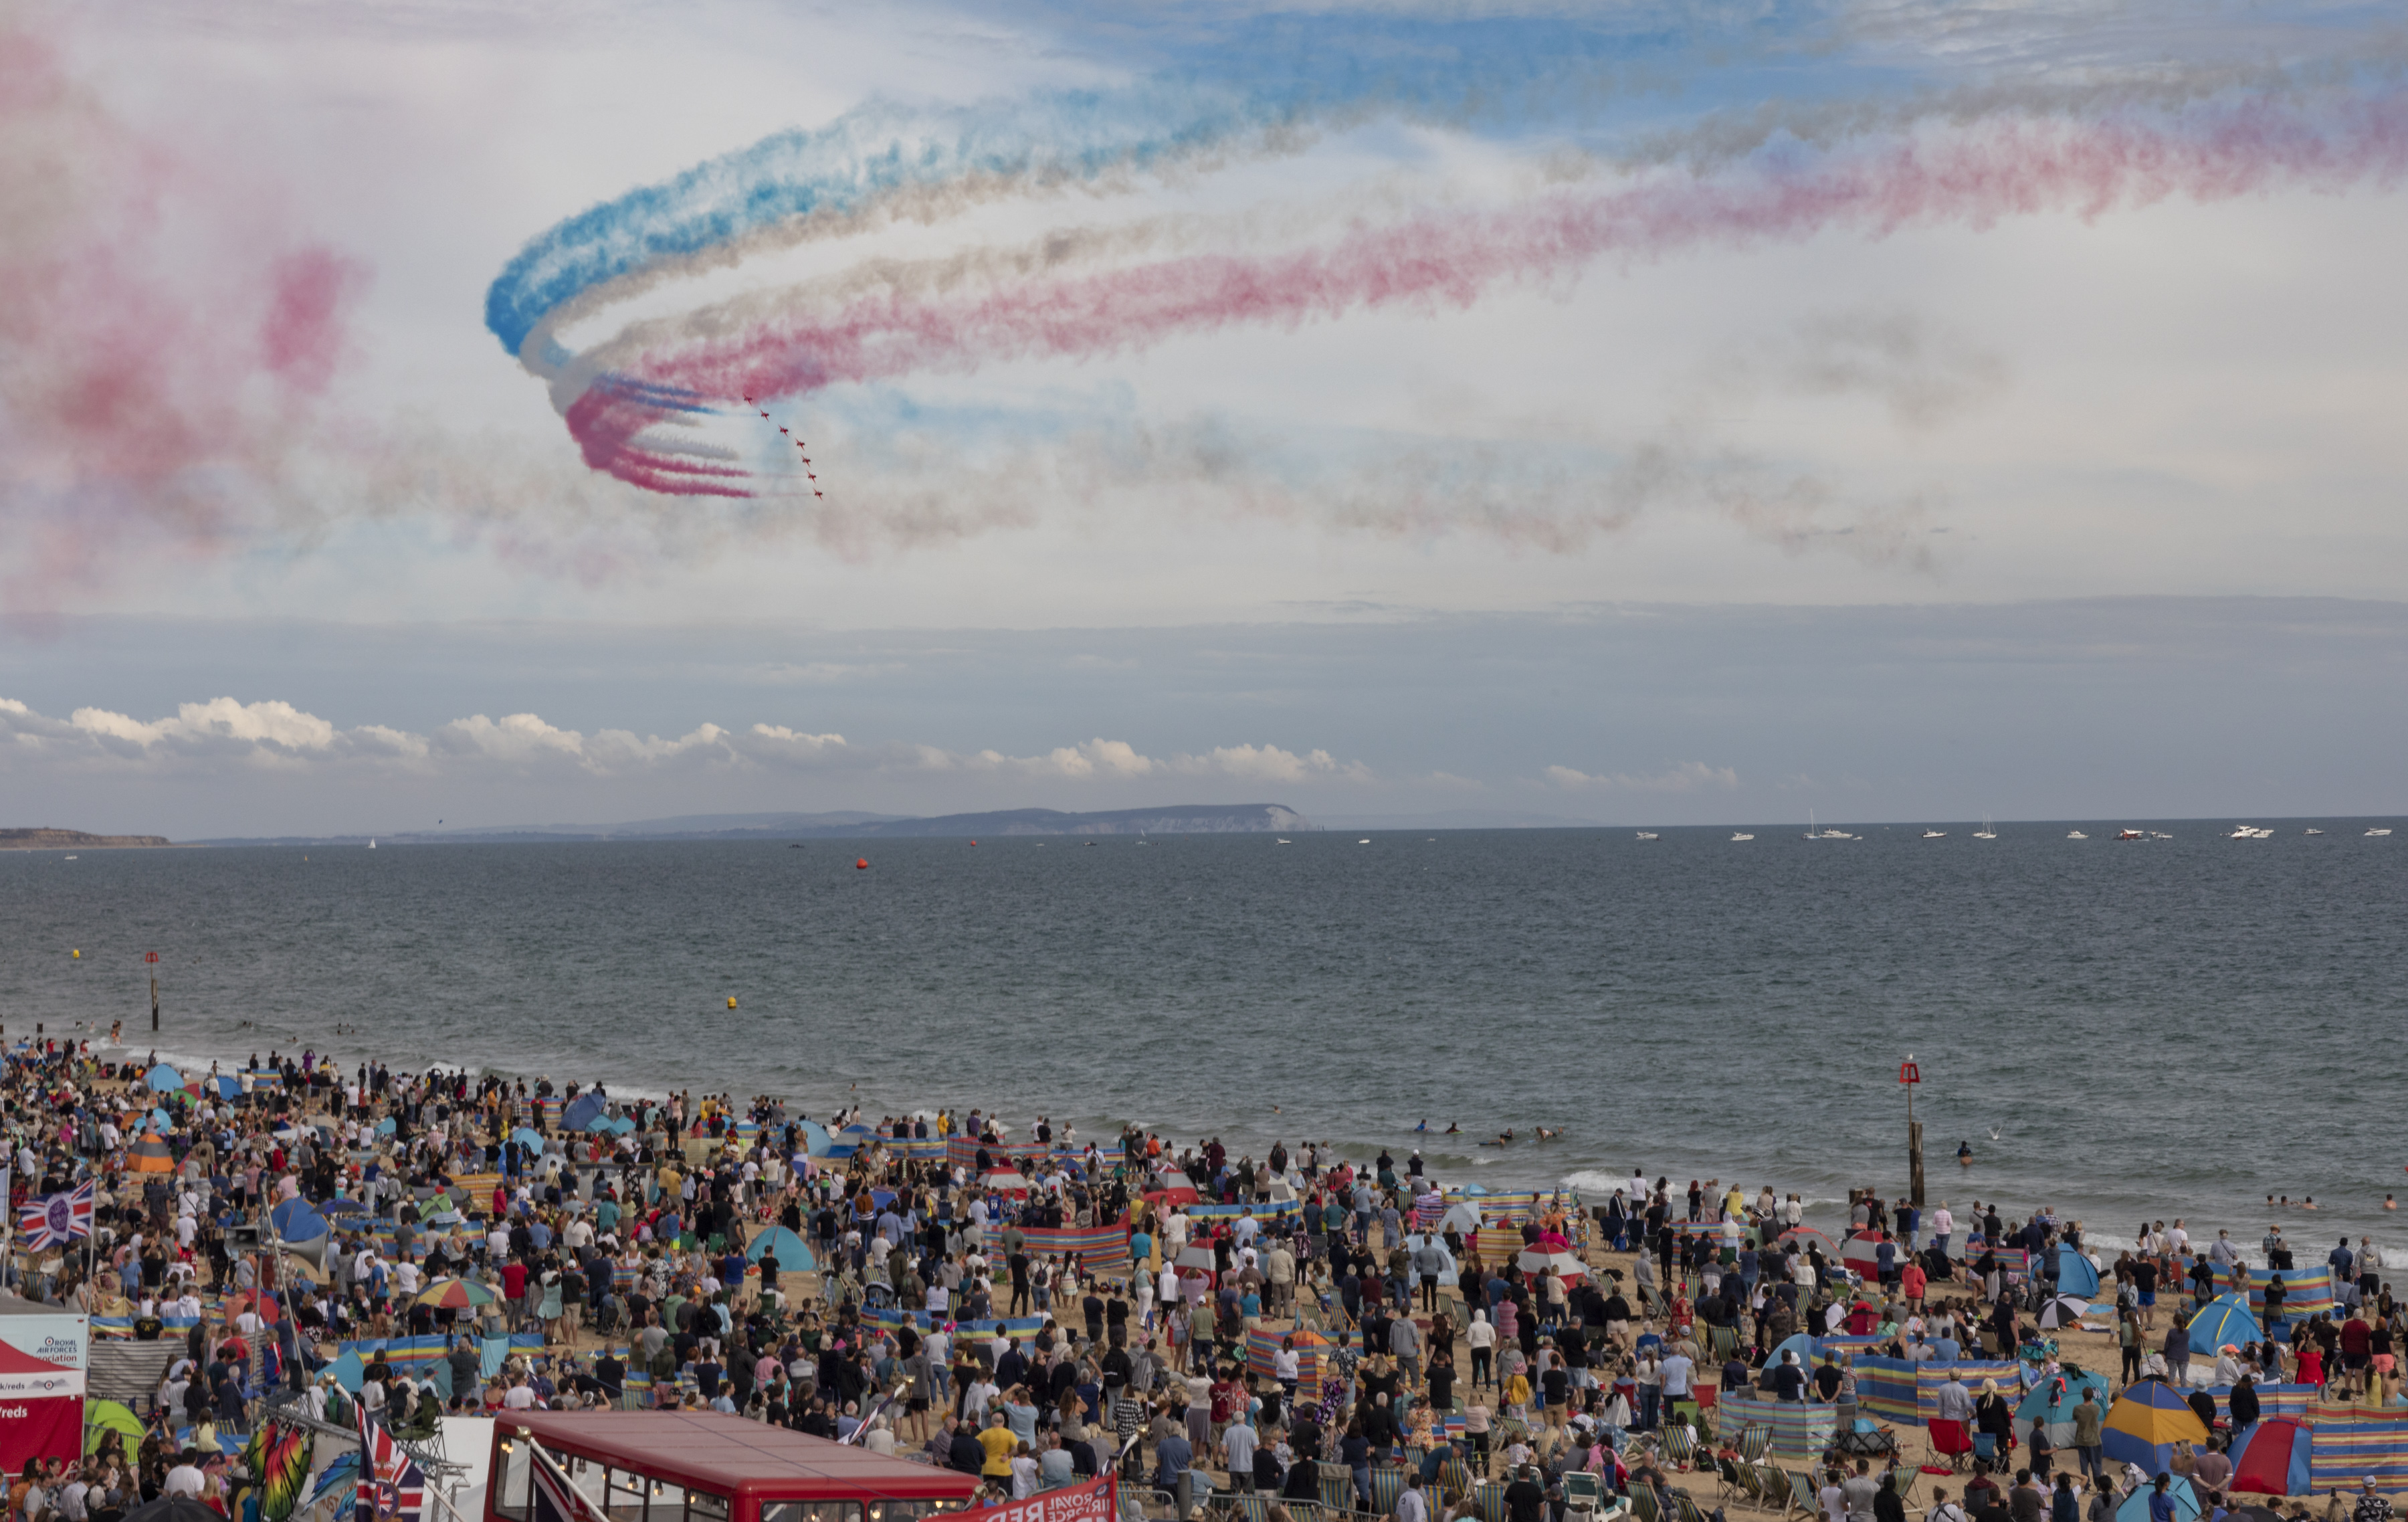 Airshows in the UK attract millions of people every season.